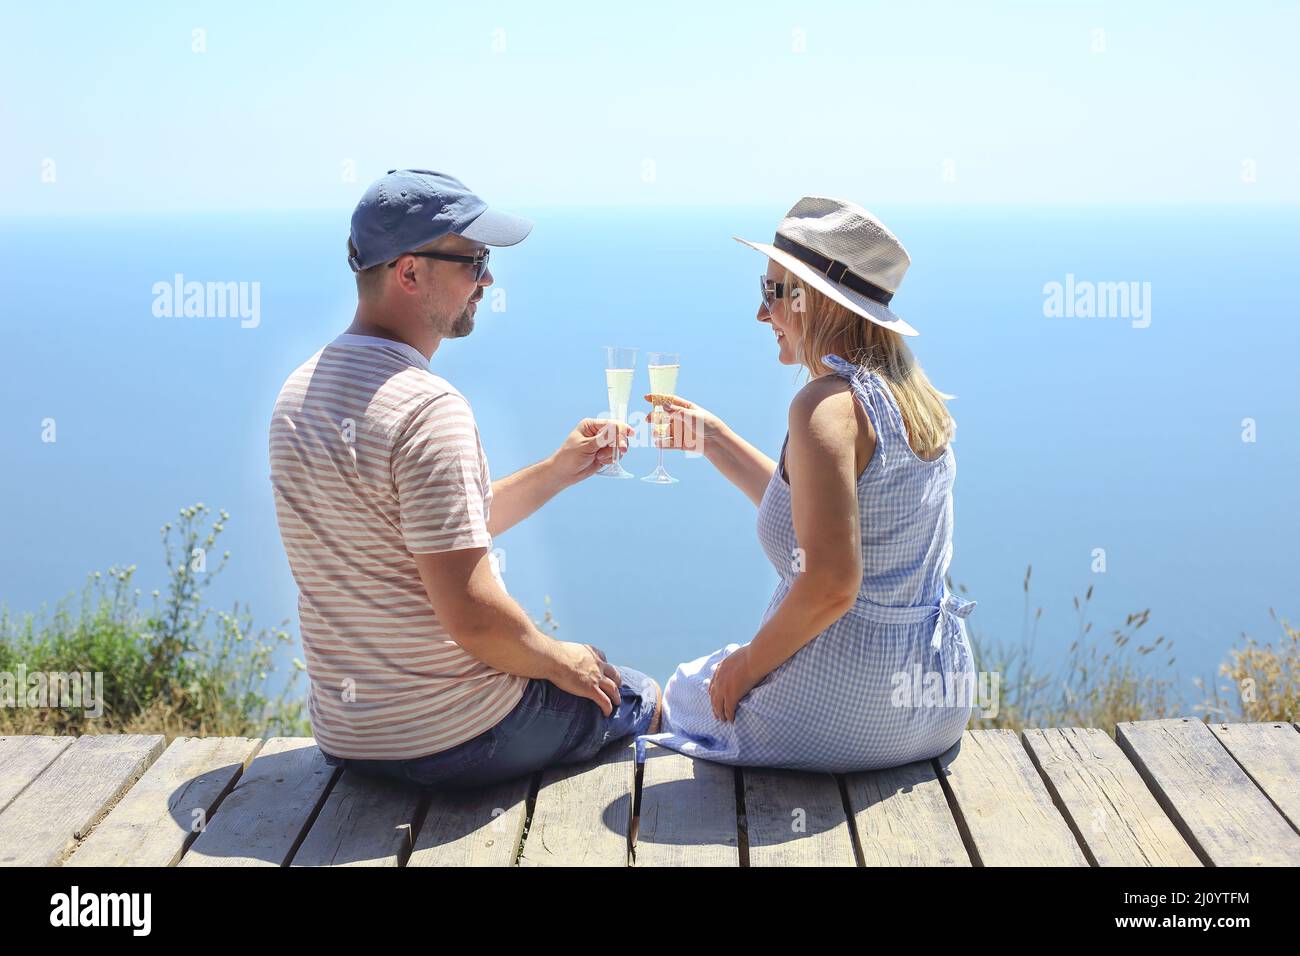 Two glasses of champagne in the hands of a man and a woman Stock Photo